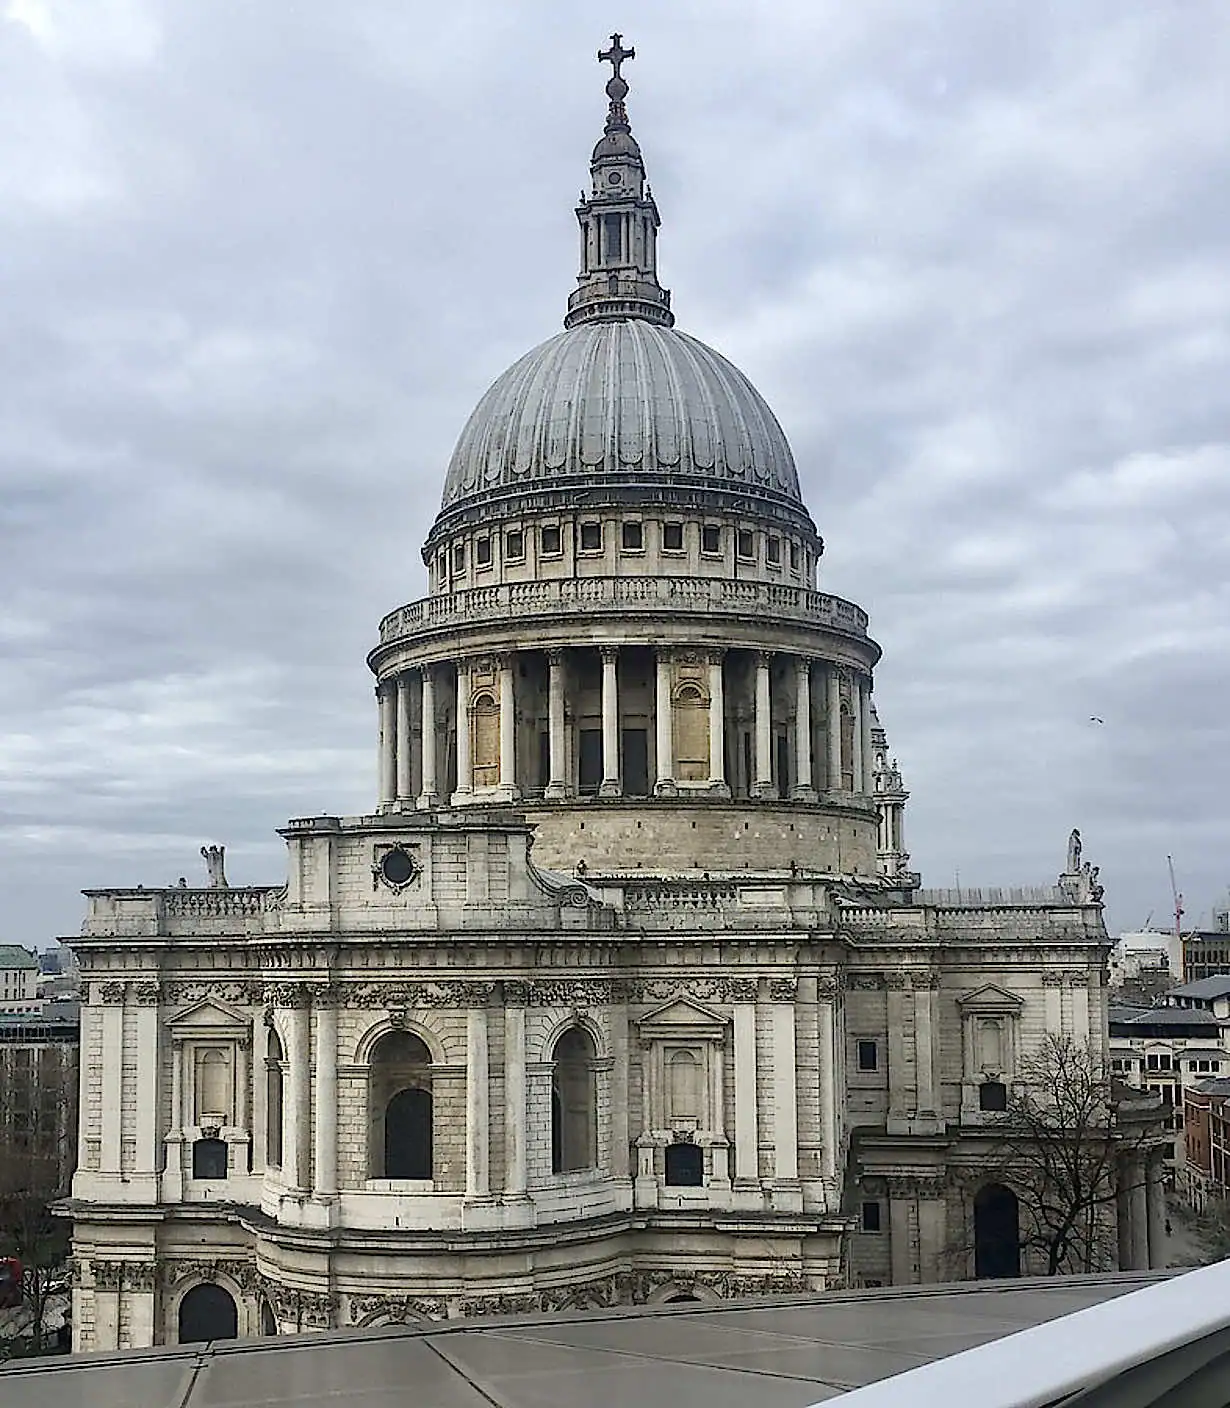 View of St. Paul’s Cathedral from One New Change